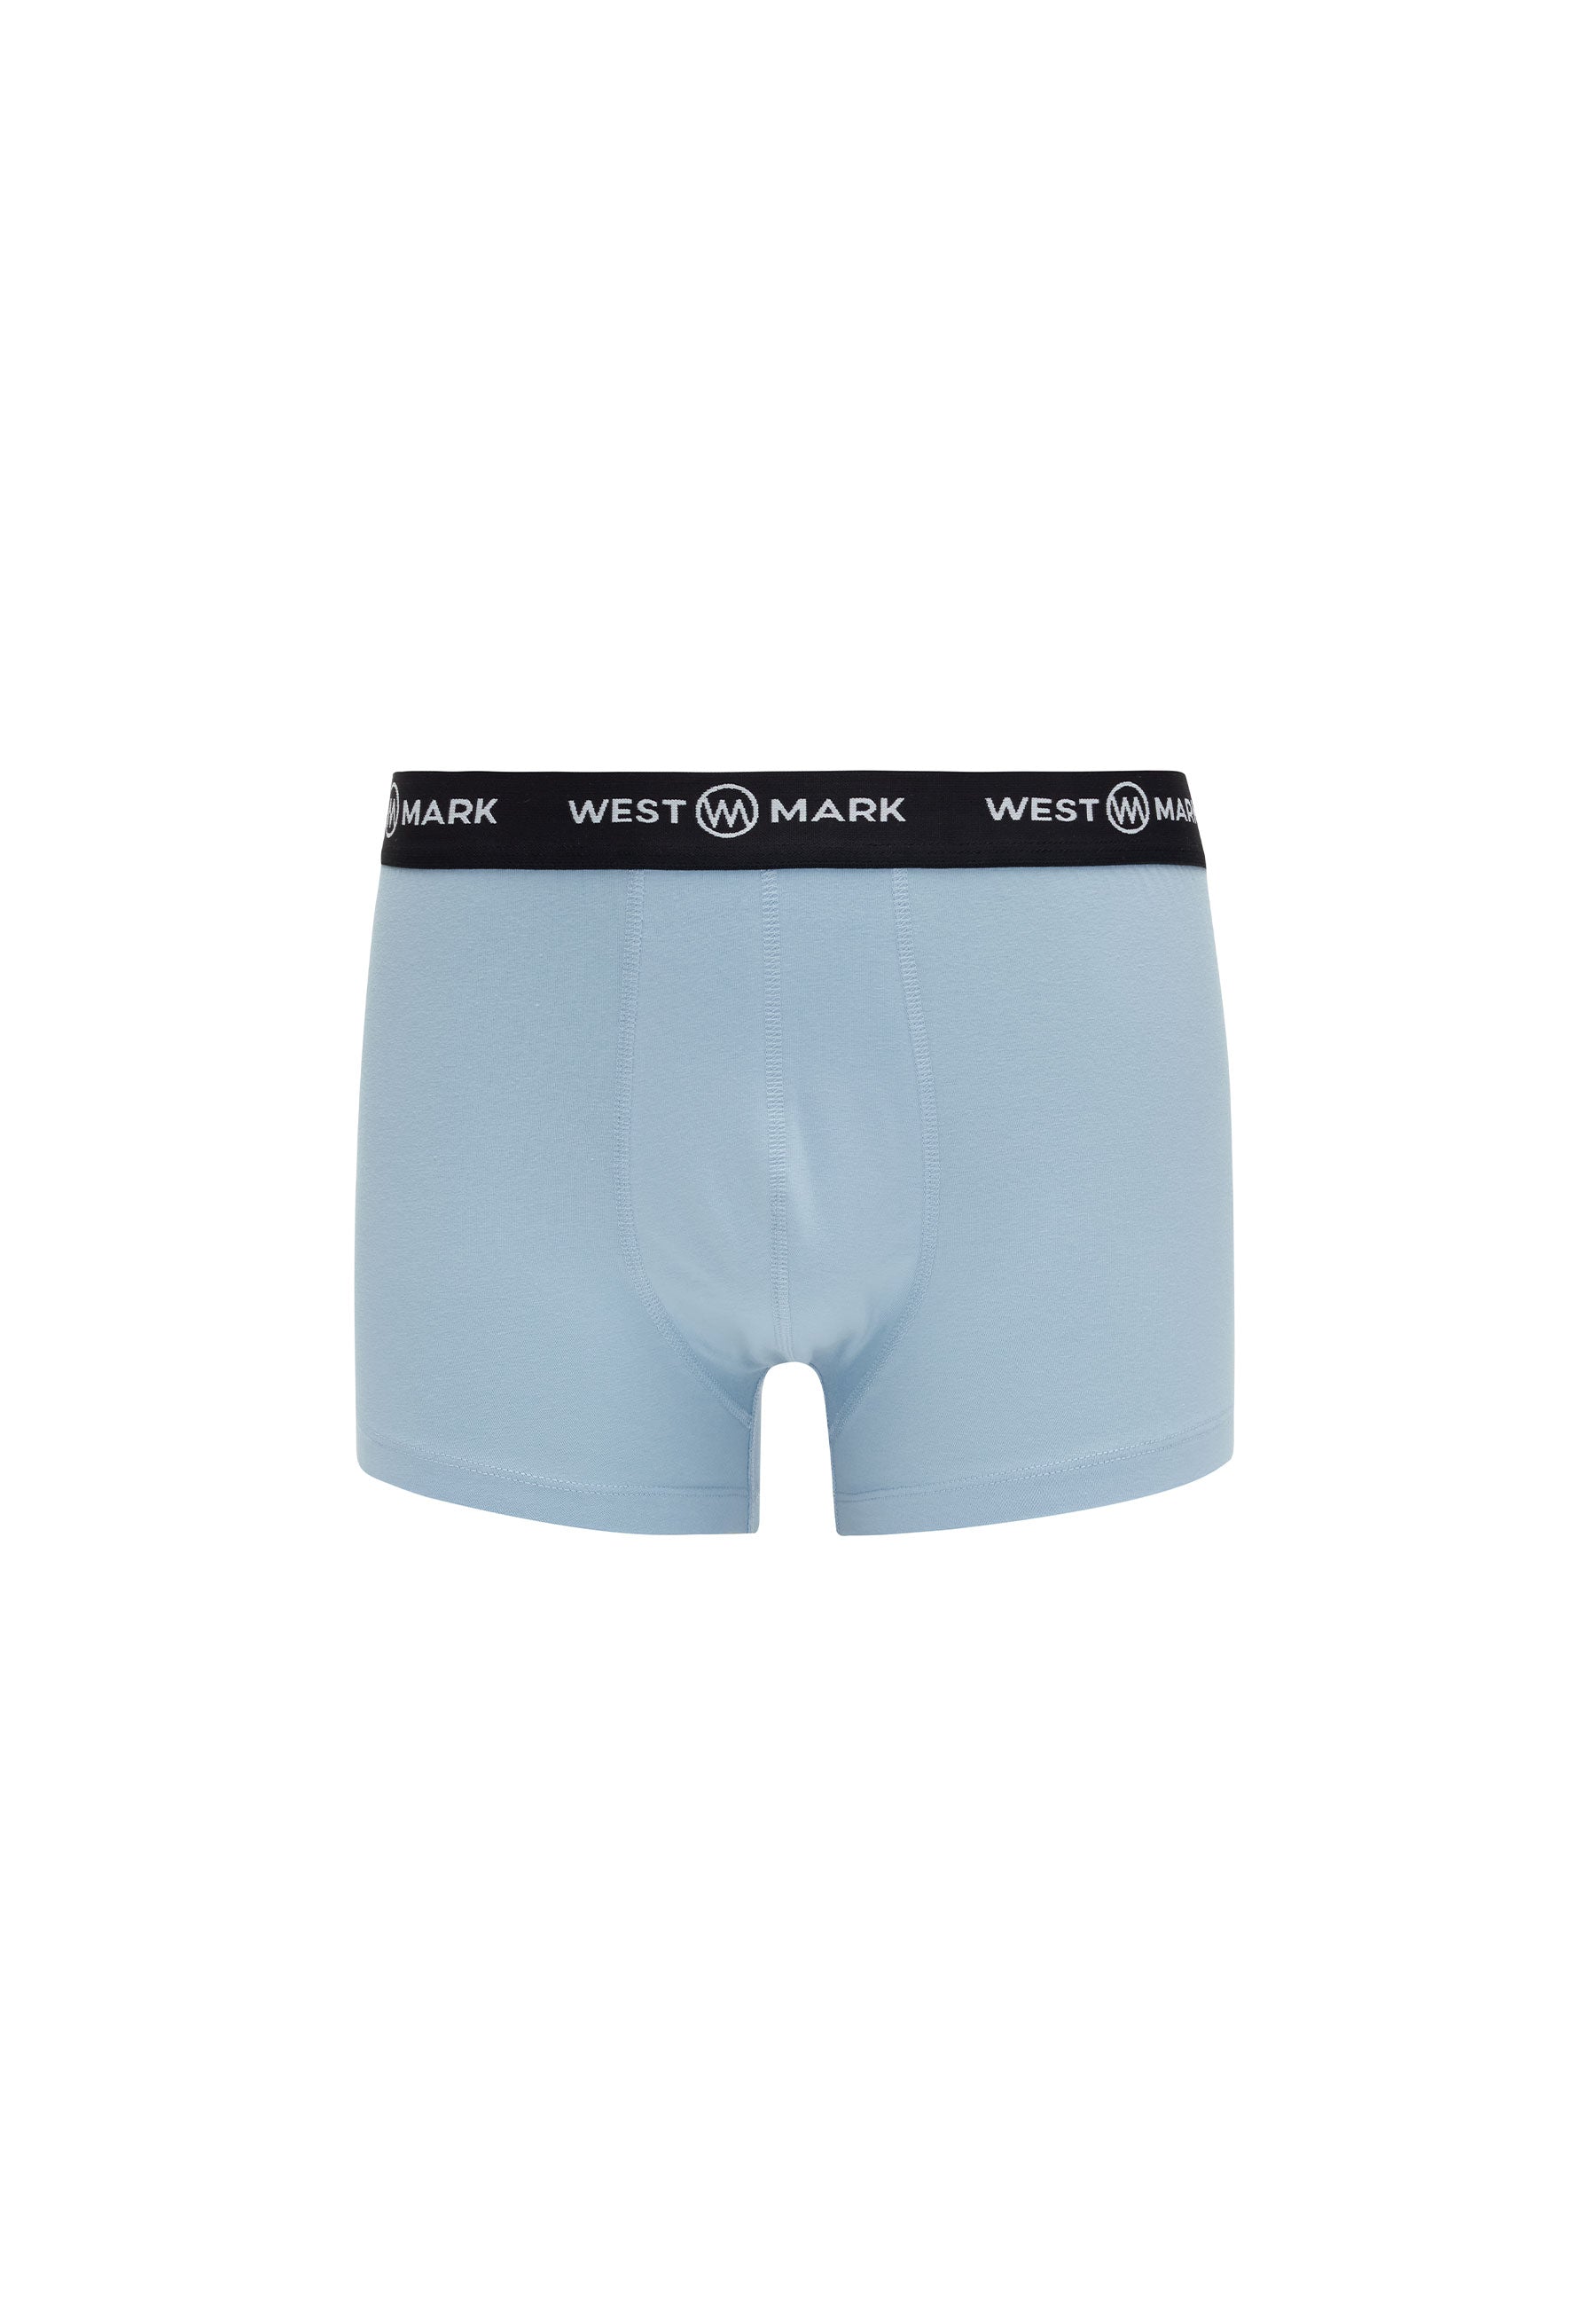 OSCAR 3-PACK WMABSTRACT in Light Blue, White